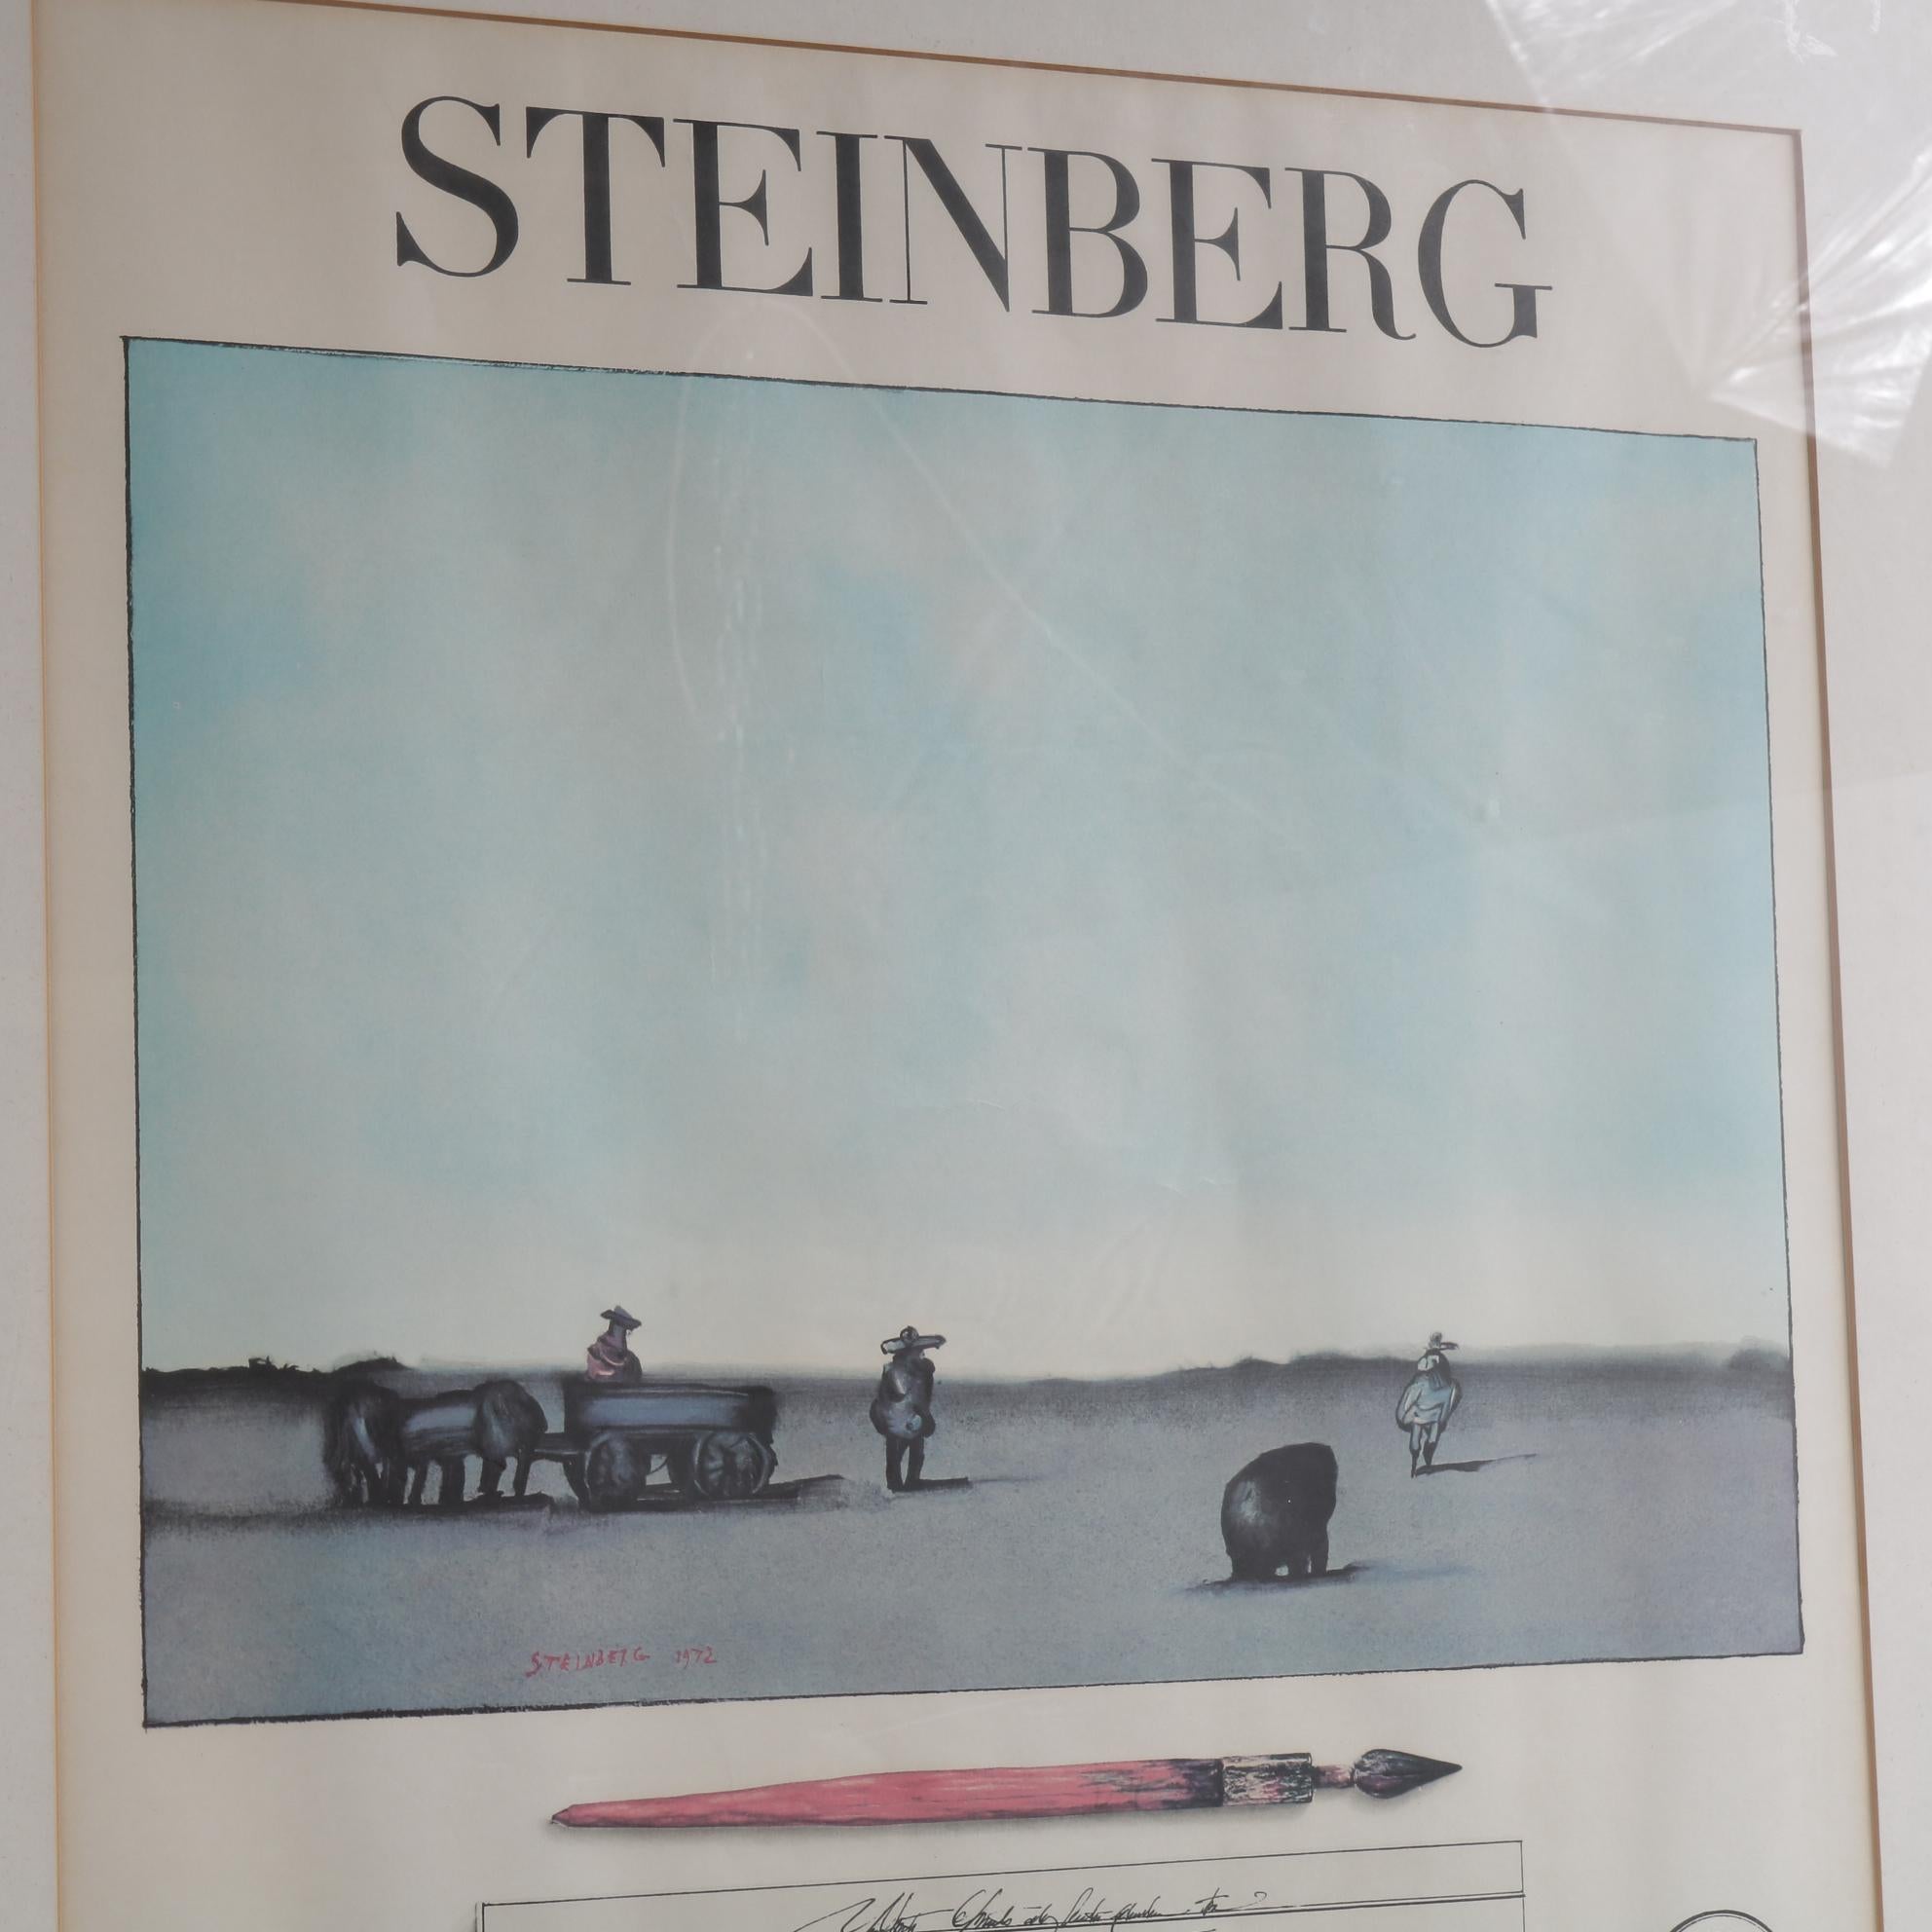 A beautiful lithography for the Steinberg Exhibition at Galerie Maeght, printed by Mourlot in Paris, France in 1973.

Framed in a nice, Minimalist black frame with passe partout, bringing out the best in the artwork.

In very good condition with